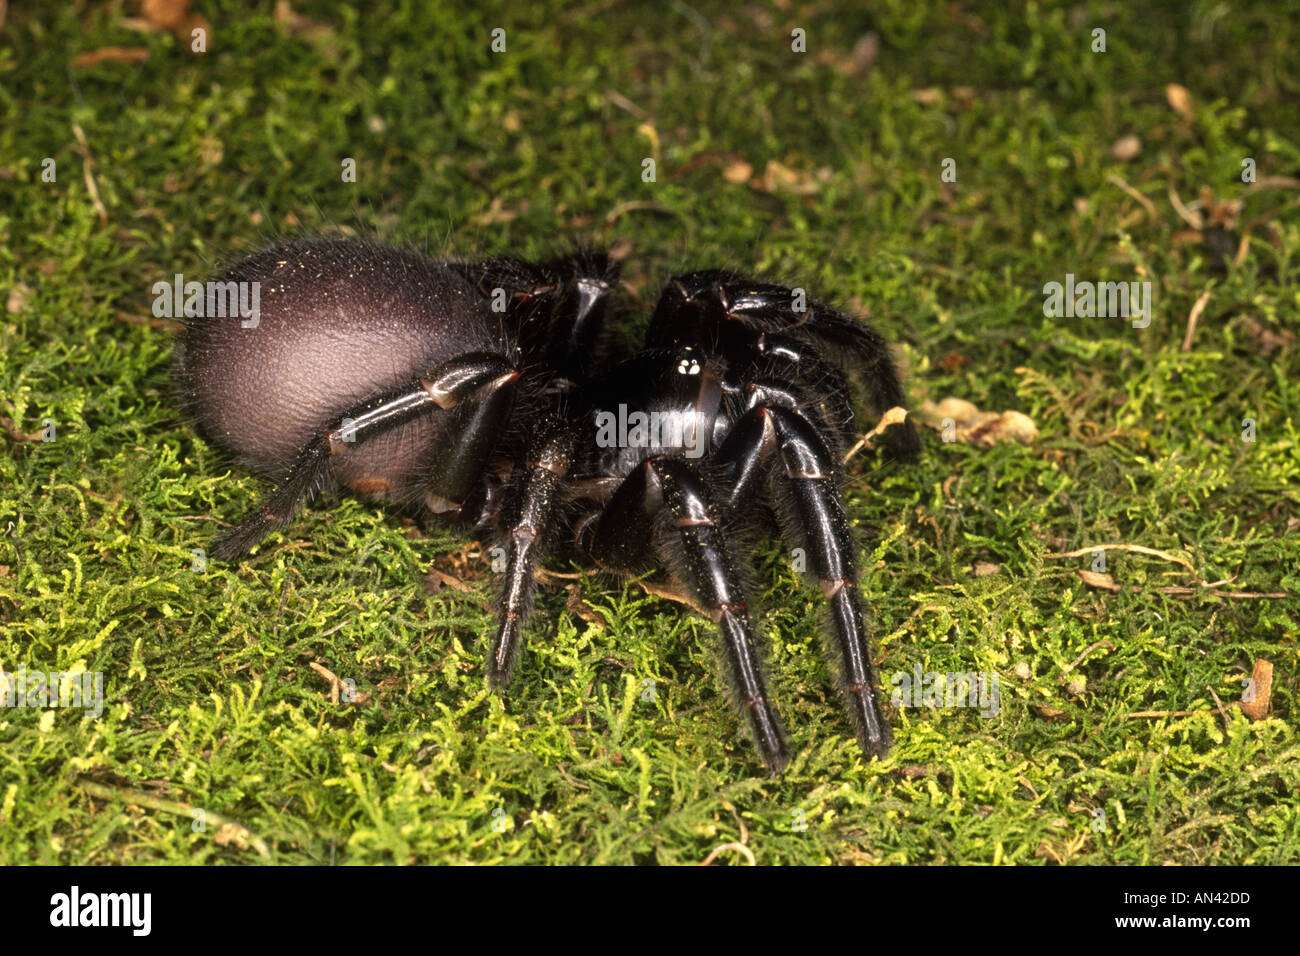 Sydney Funnel Web Spider, Atrax robustus . These spiders are renowned for their highly toxic and fast acting venom. Stock Photo